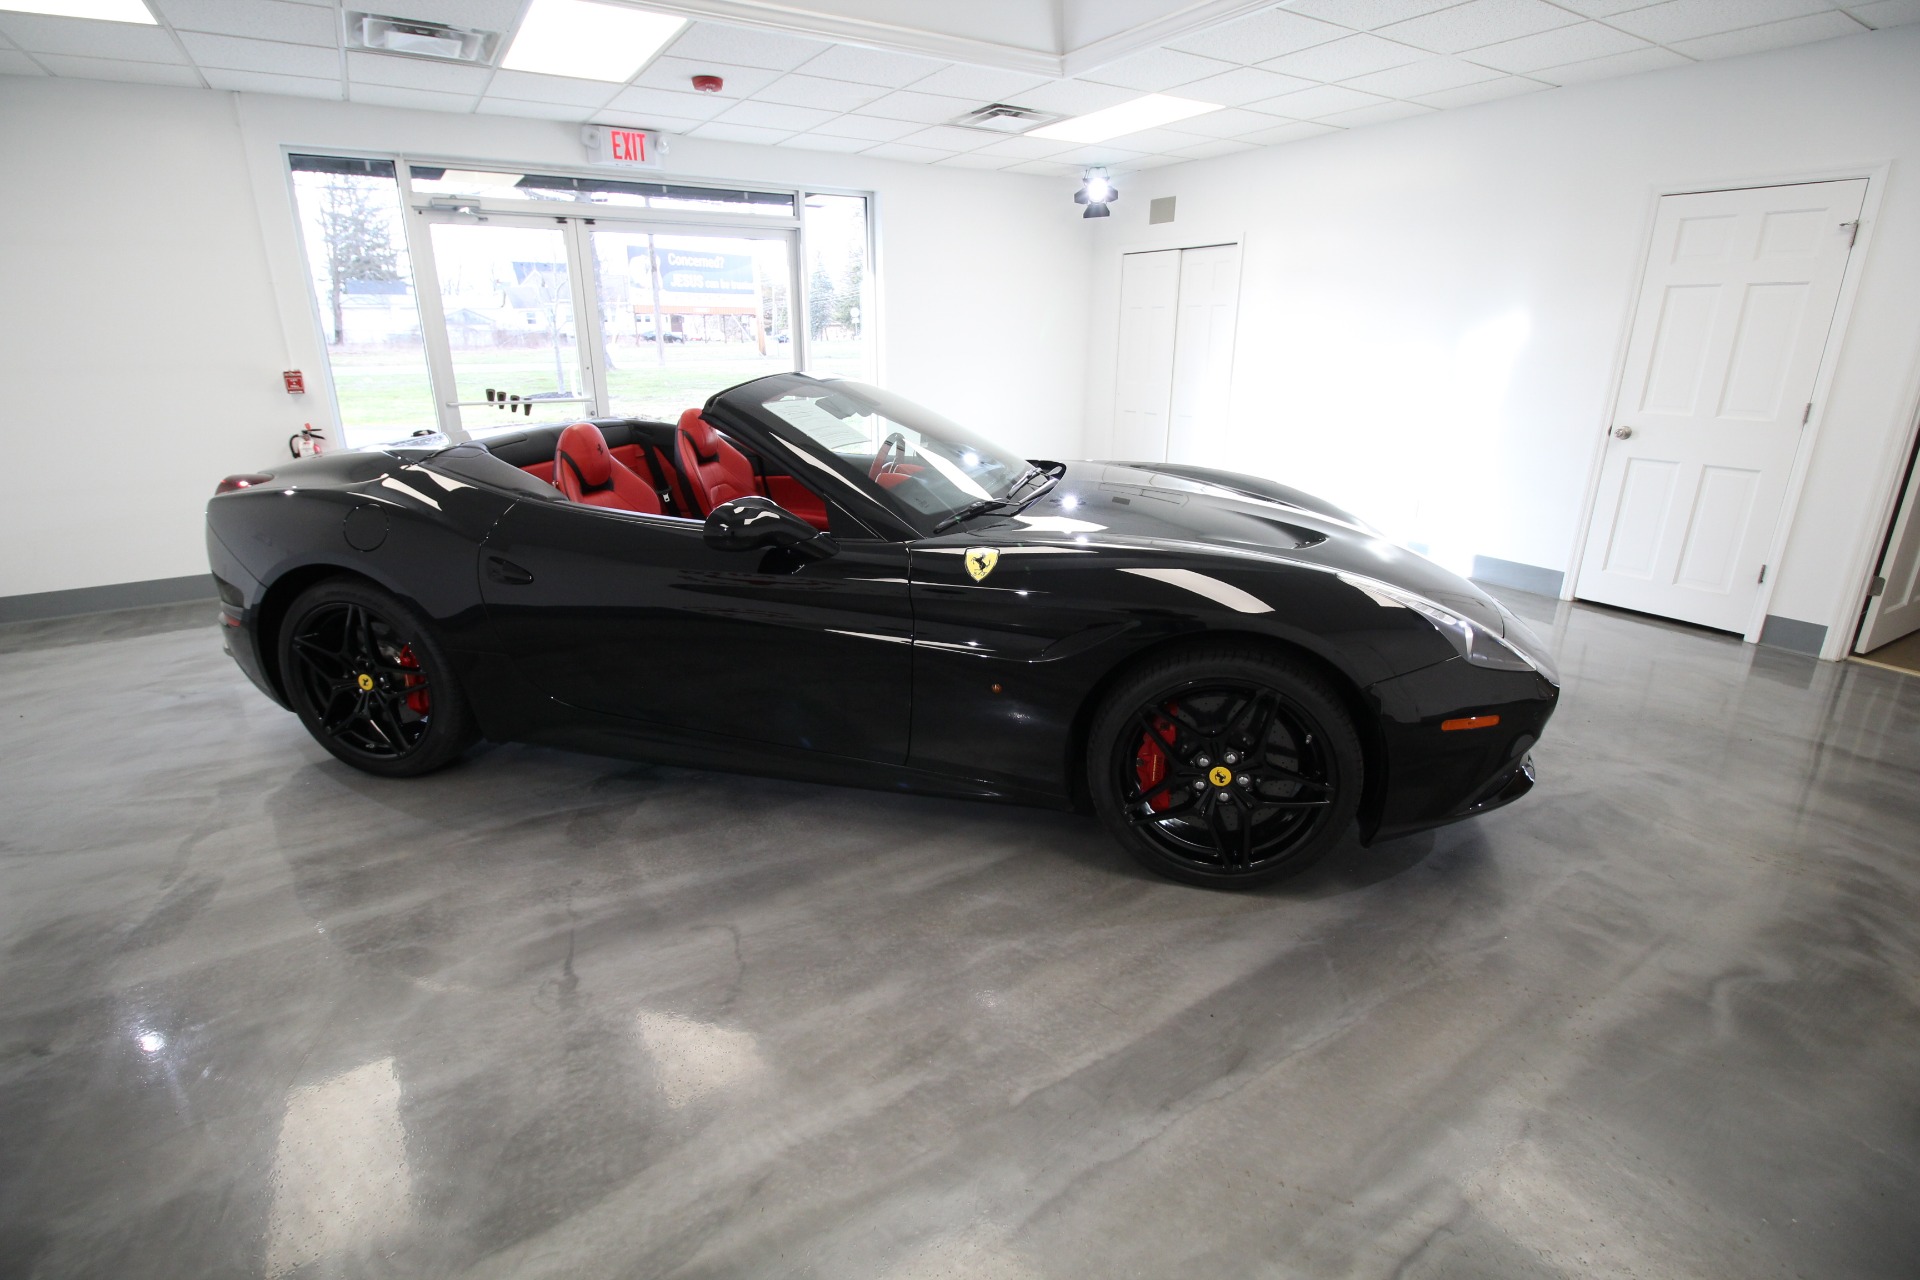 Used 2016 Black Ferrari California Convertible T RARE COLOR COMBO VERY WELL OPTIONED LOW MILES | Albany, NY